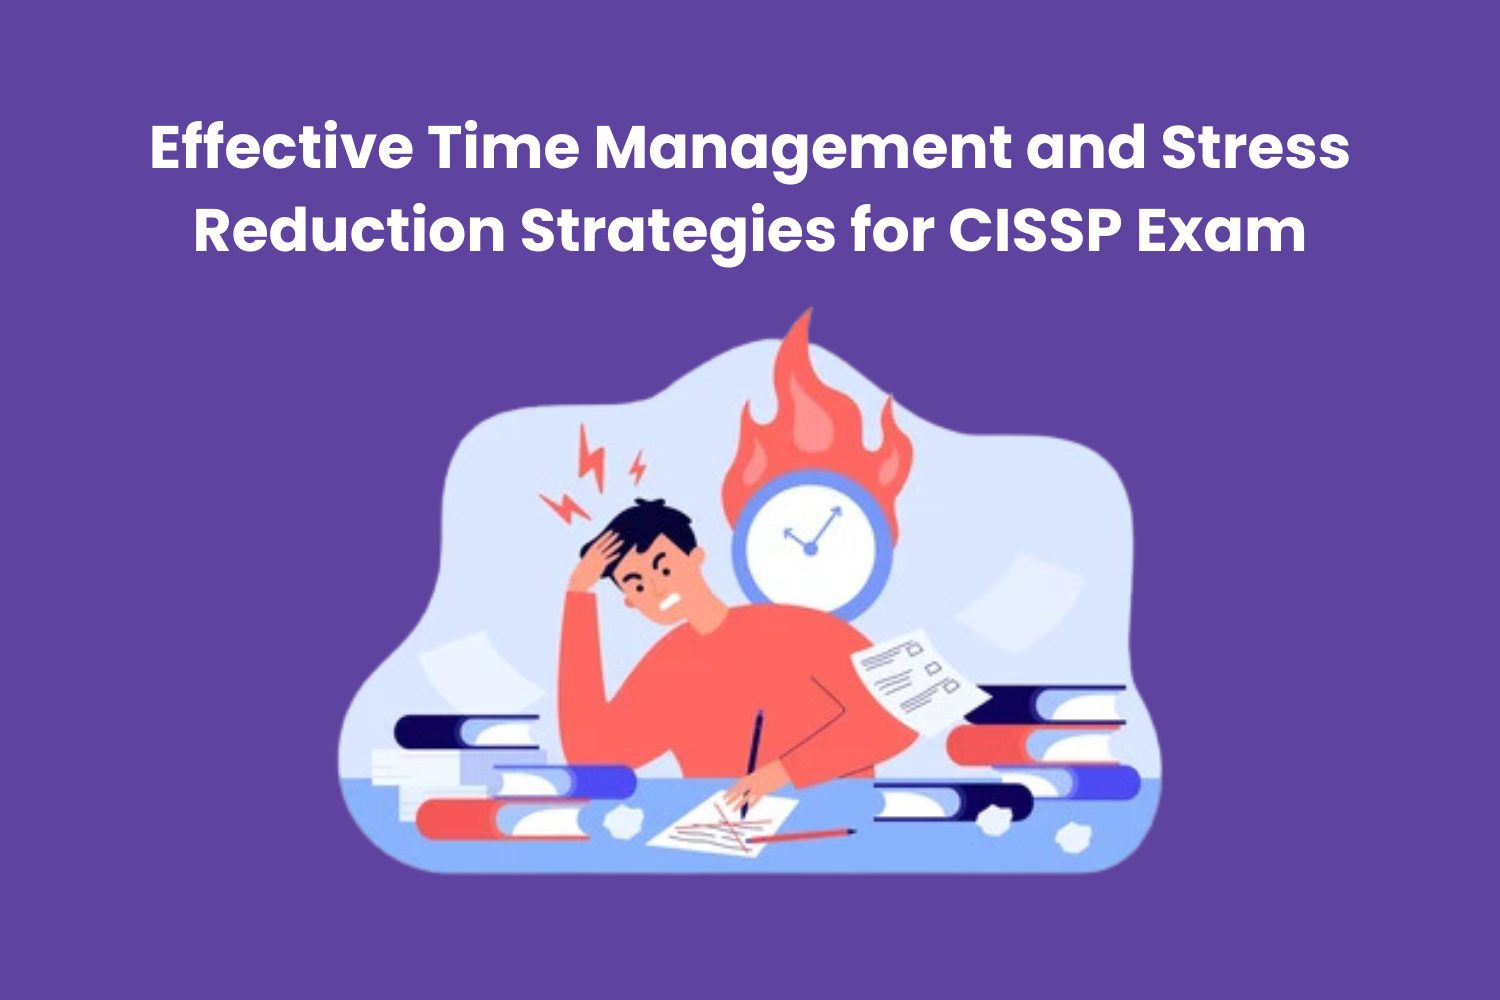 Effective Time Management and Stress Reduction Strategies for CISSP Exam